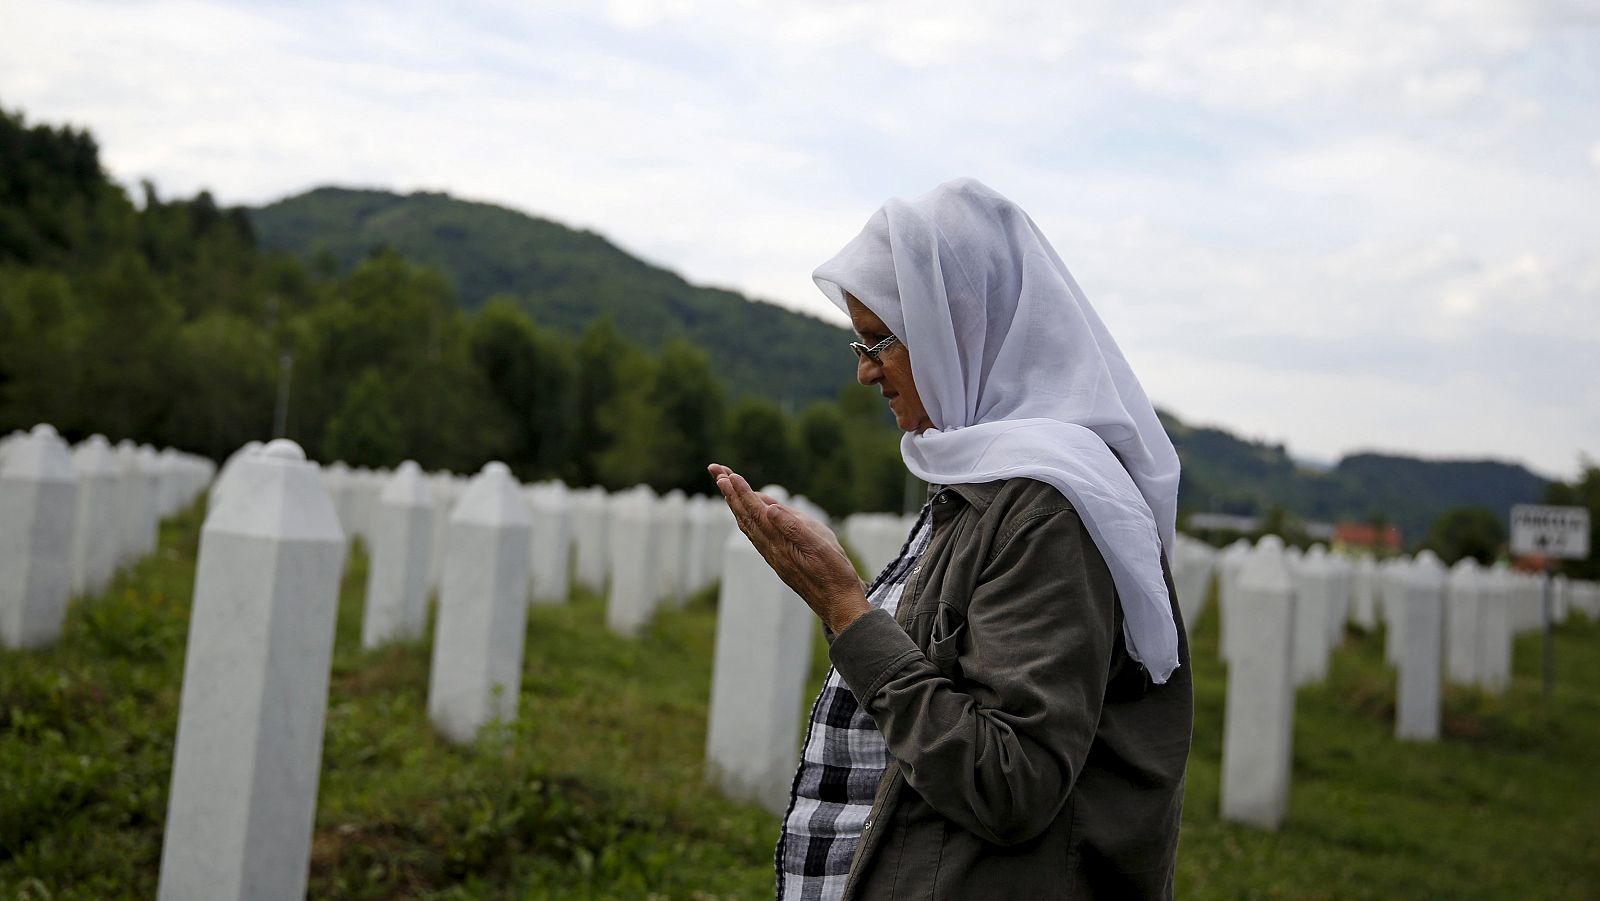 Hajra Catic prays near the grave of her husband at the Memorial center in Potocari